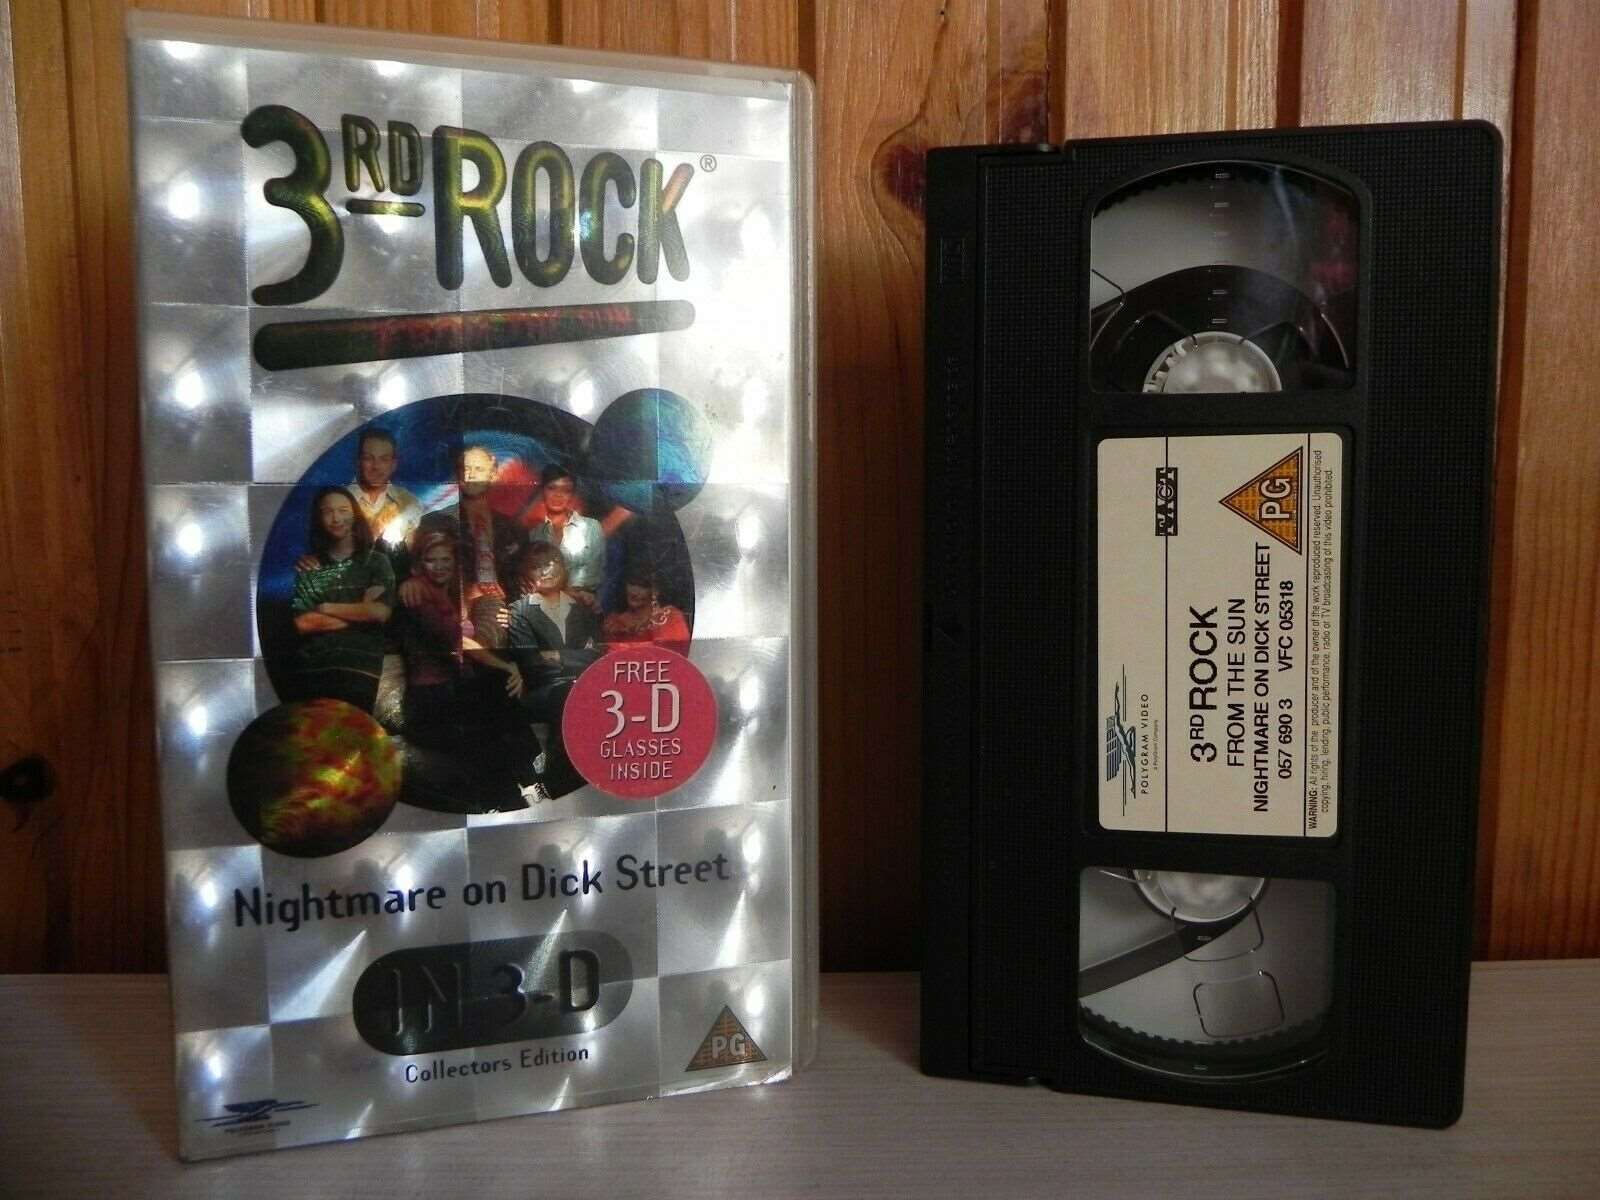 3D GLASSES - 3rd Rock From The Sun - Nightmare On Dick Street - Collectors VHS-